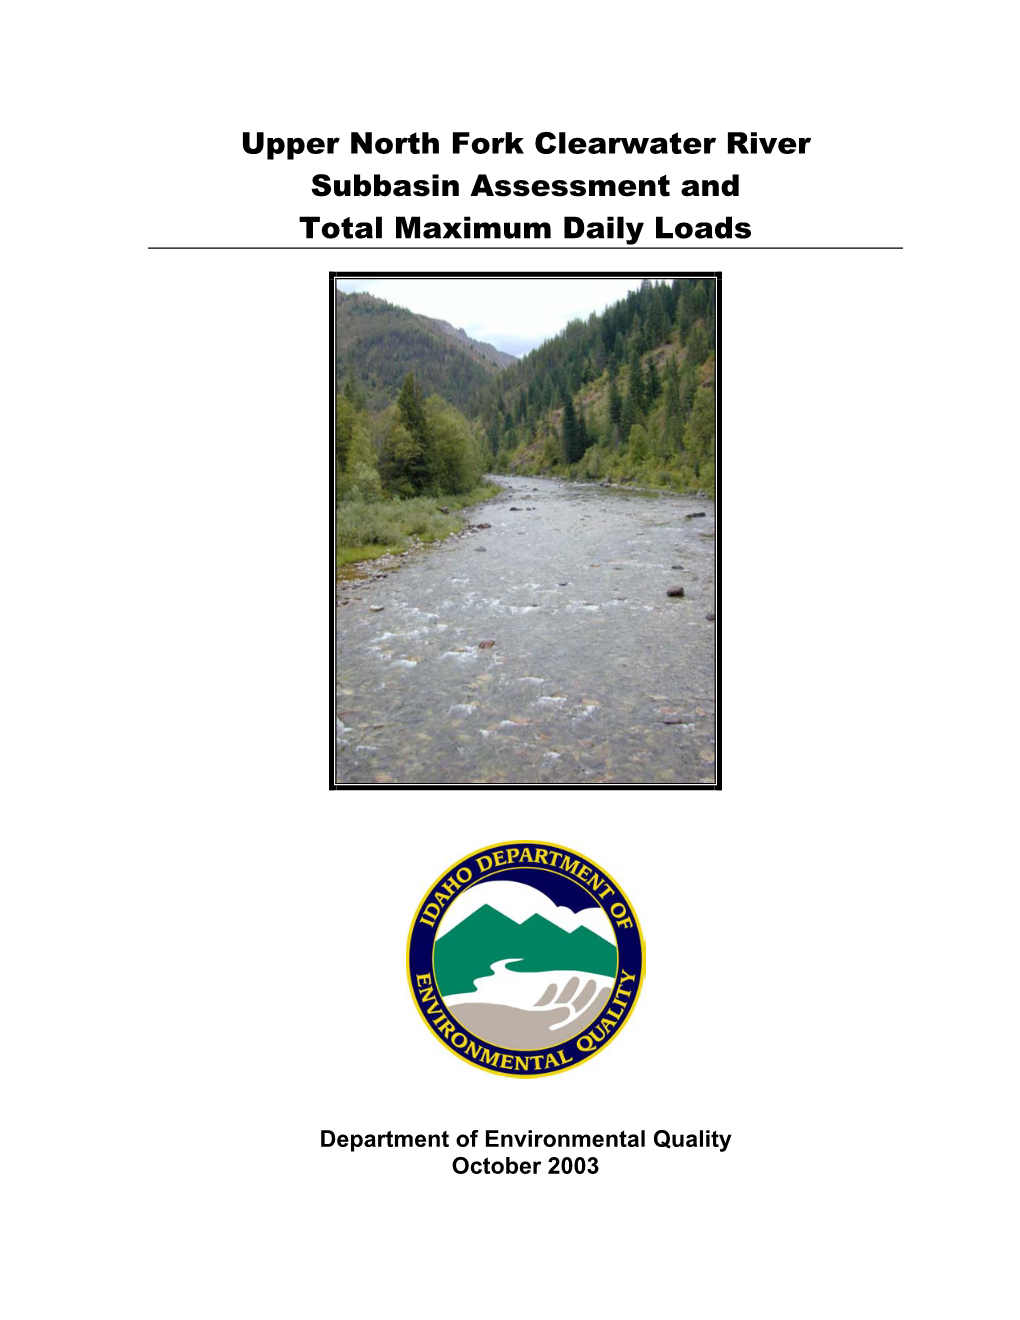 Upper North Fork Clearwater River Subbasin Assessment and Total Maximum Daily Loads